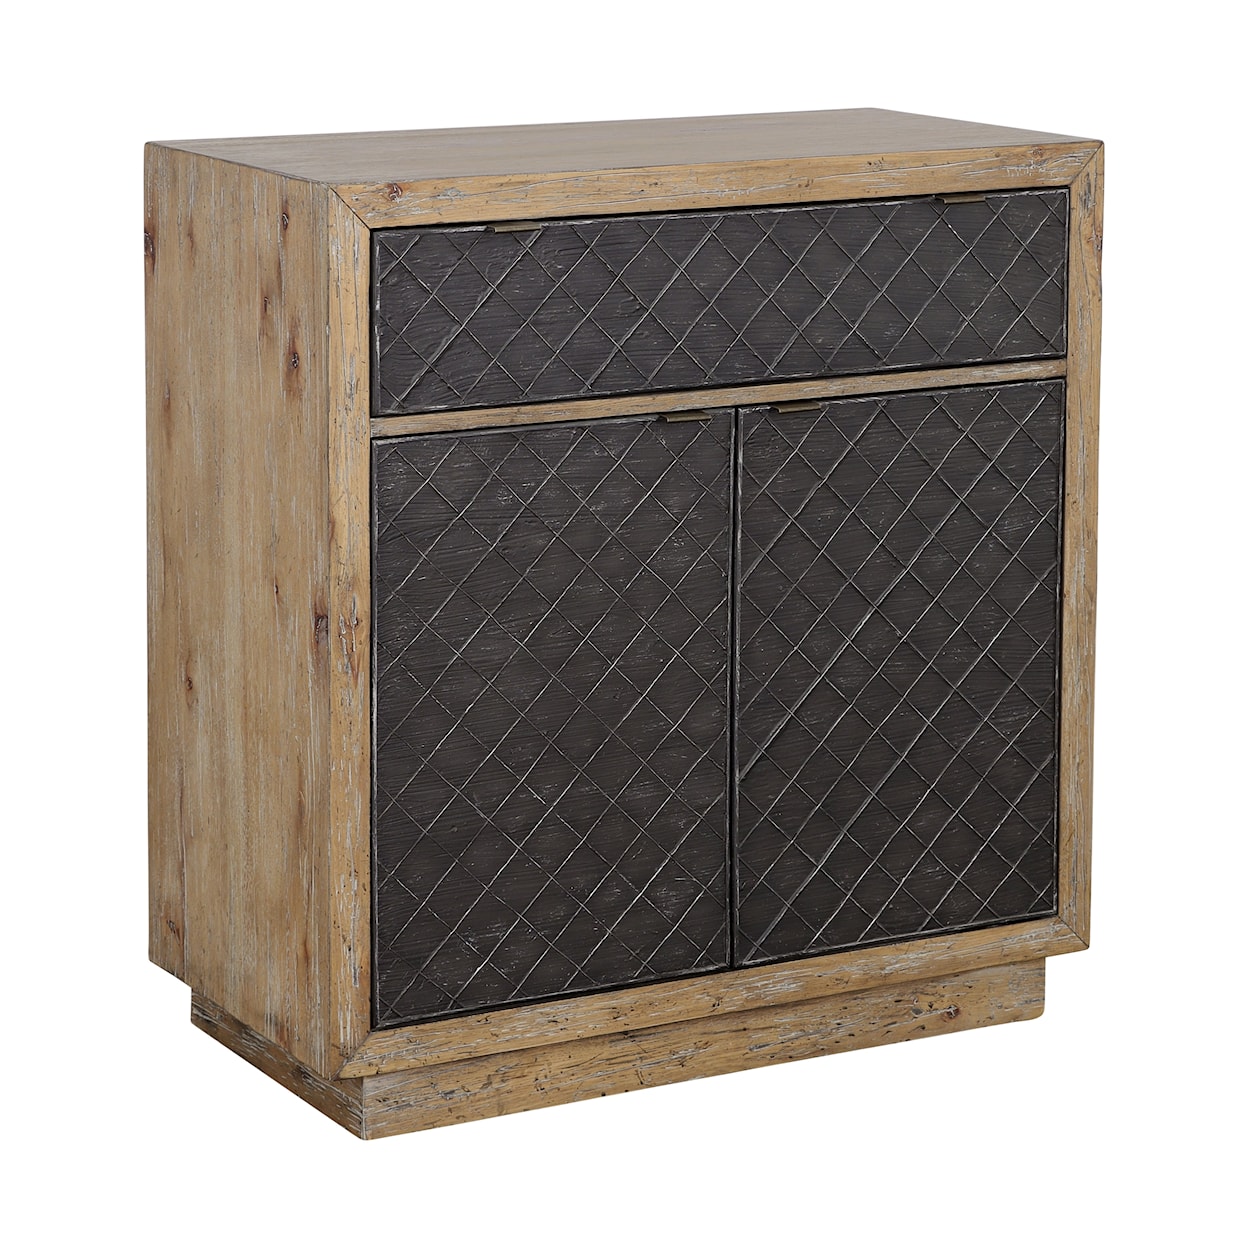 C2C Coast to Coast Imports One Drawer Two Door Cabinet